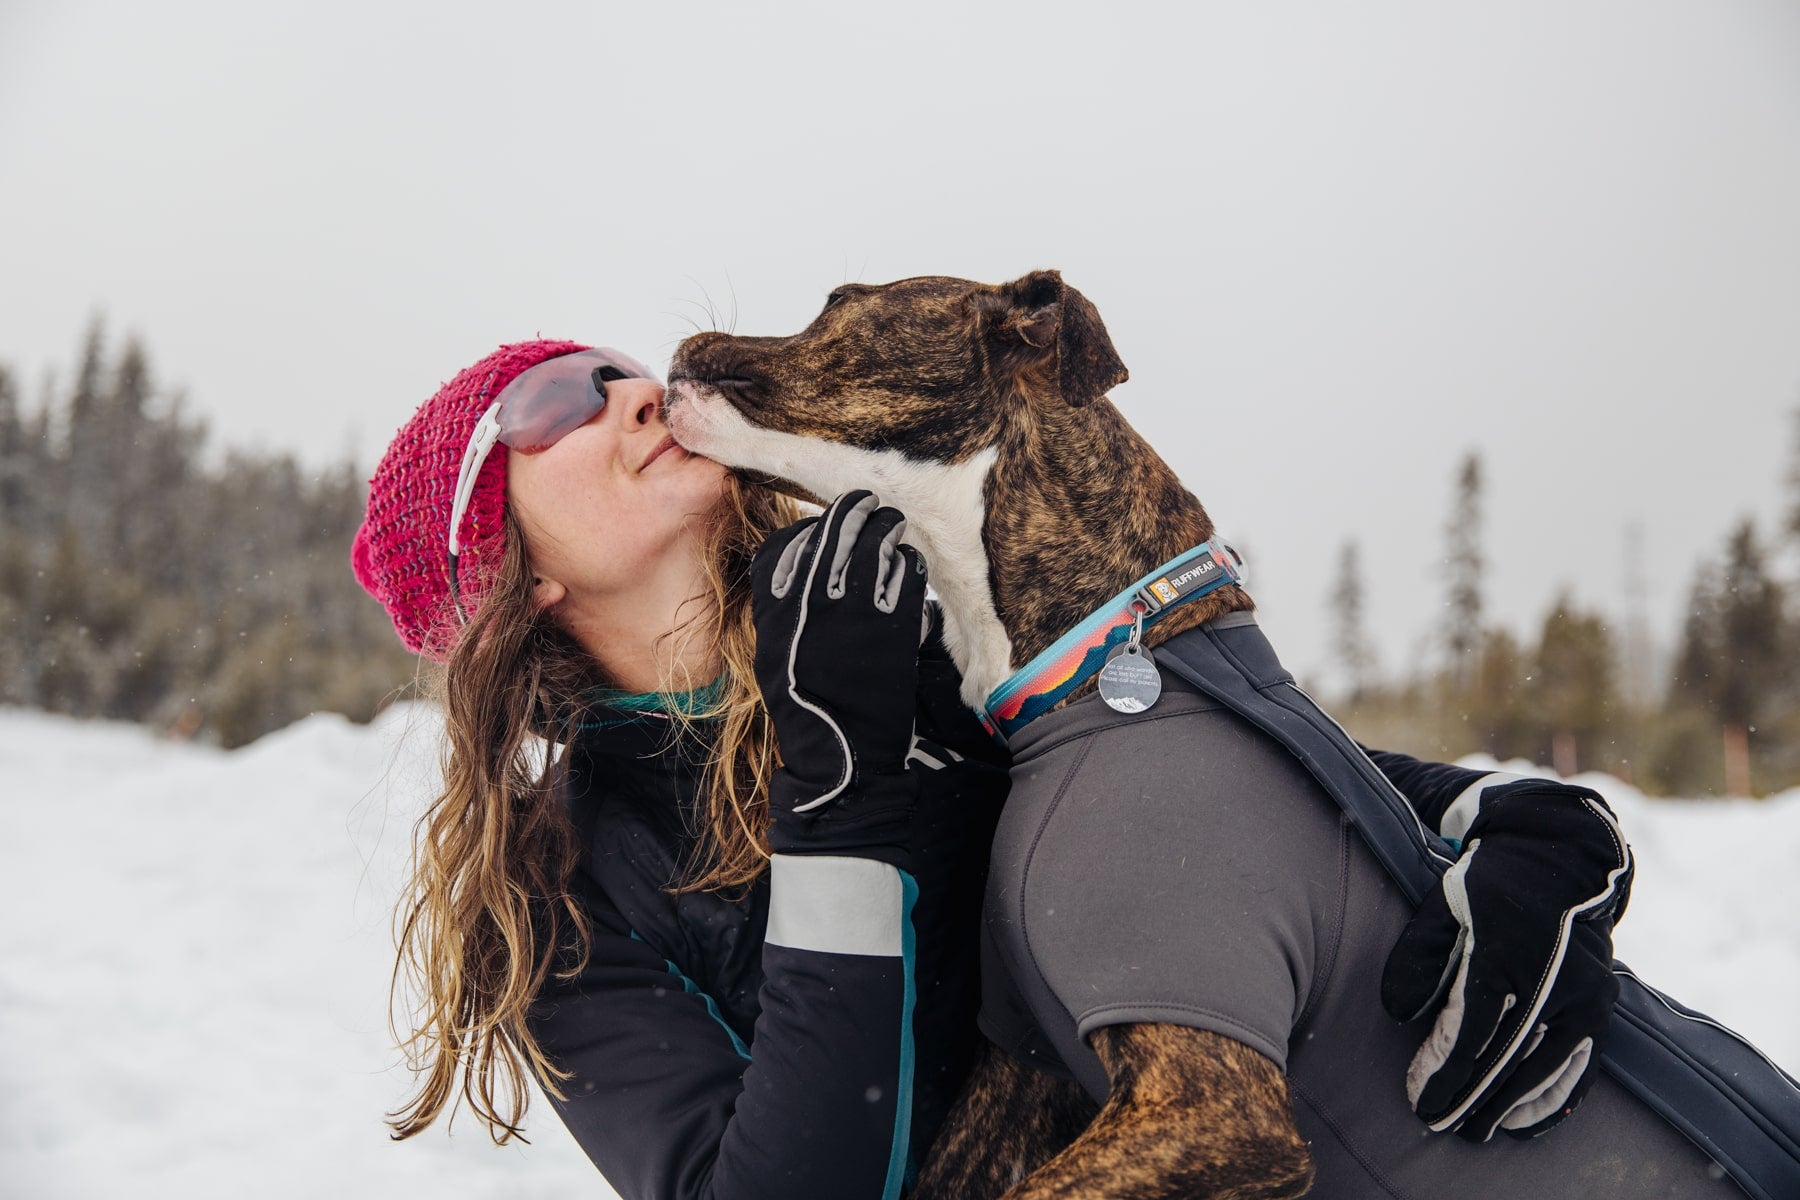 Juniper gives Kelly a smooch after skiing together.